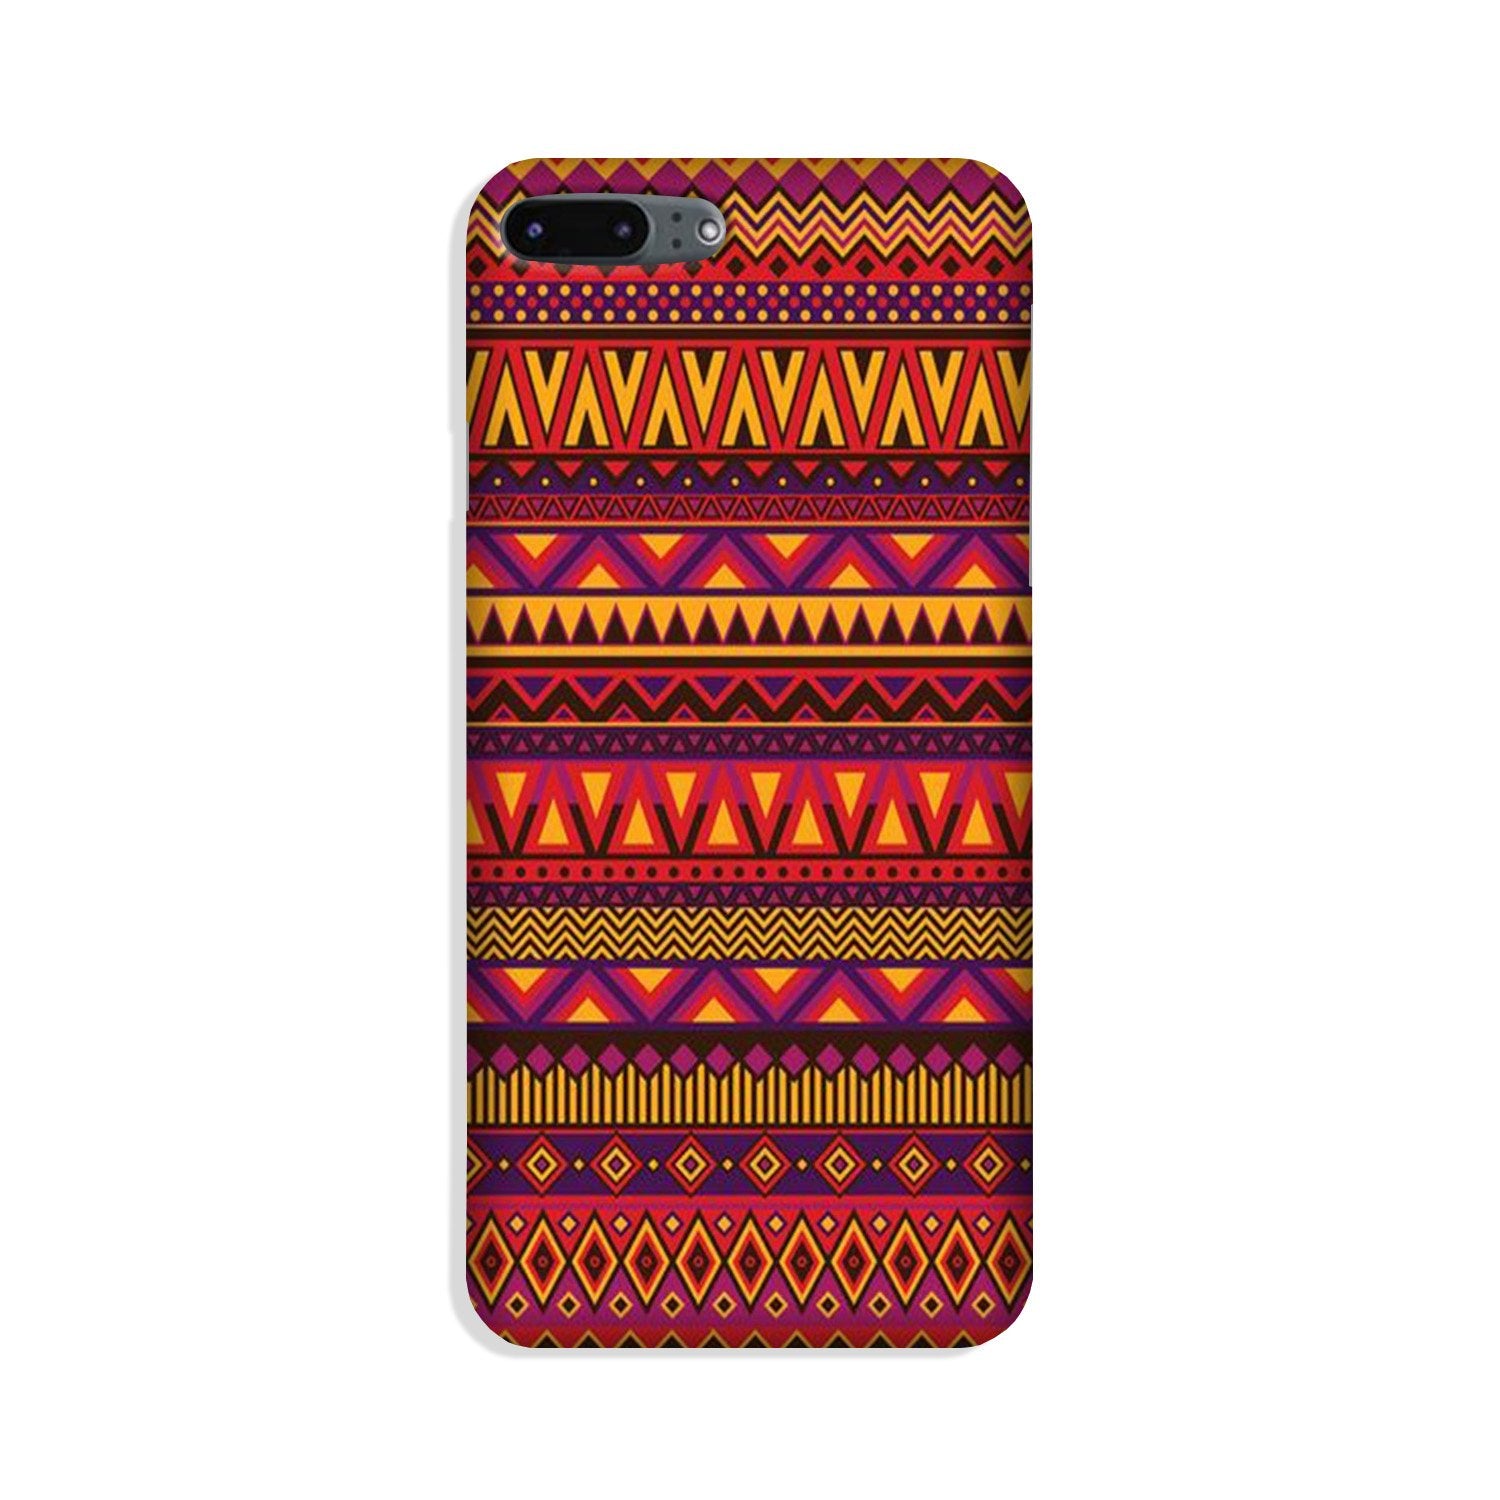 Zigzag line pattern2 Case for iPhone 8 Plus